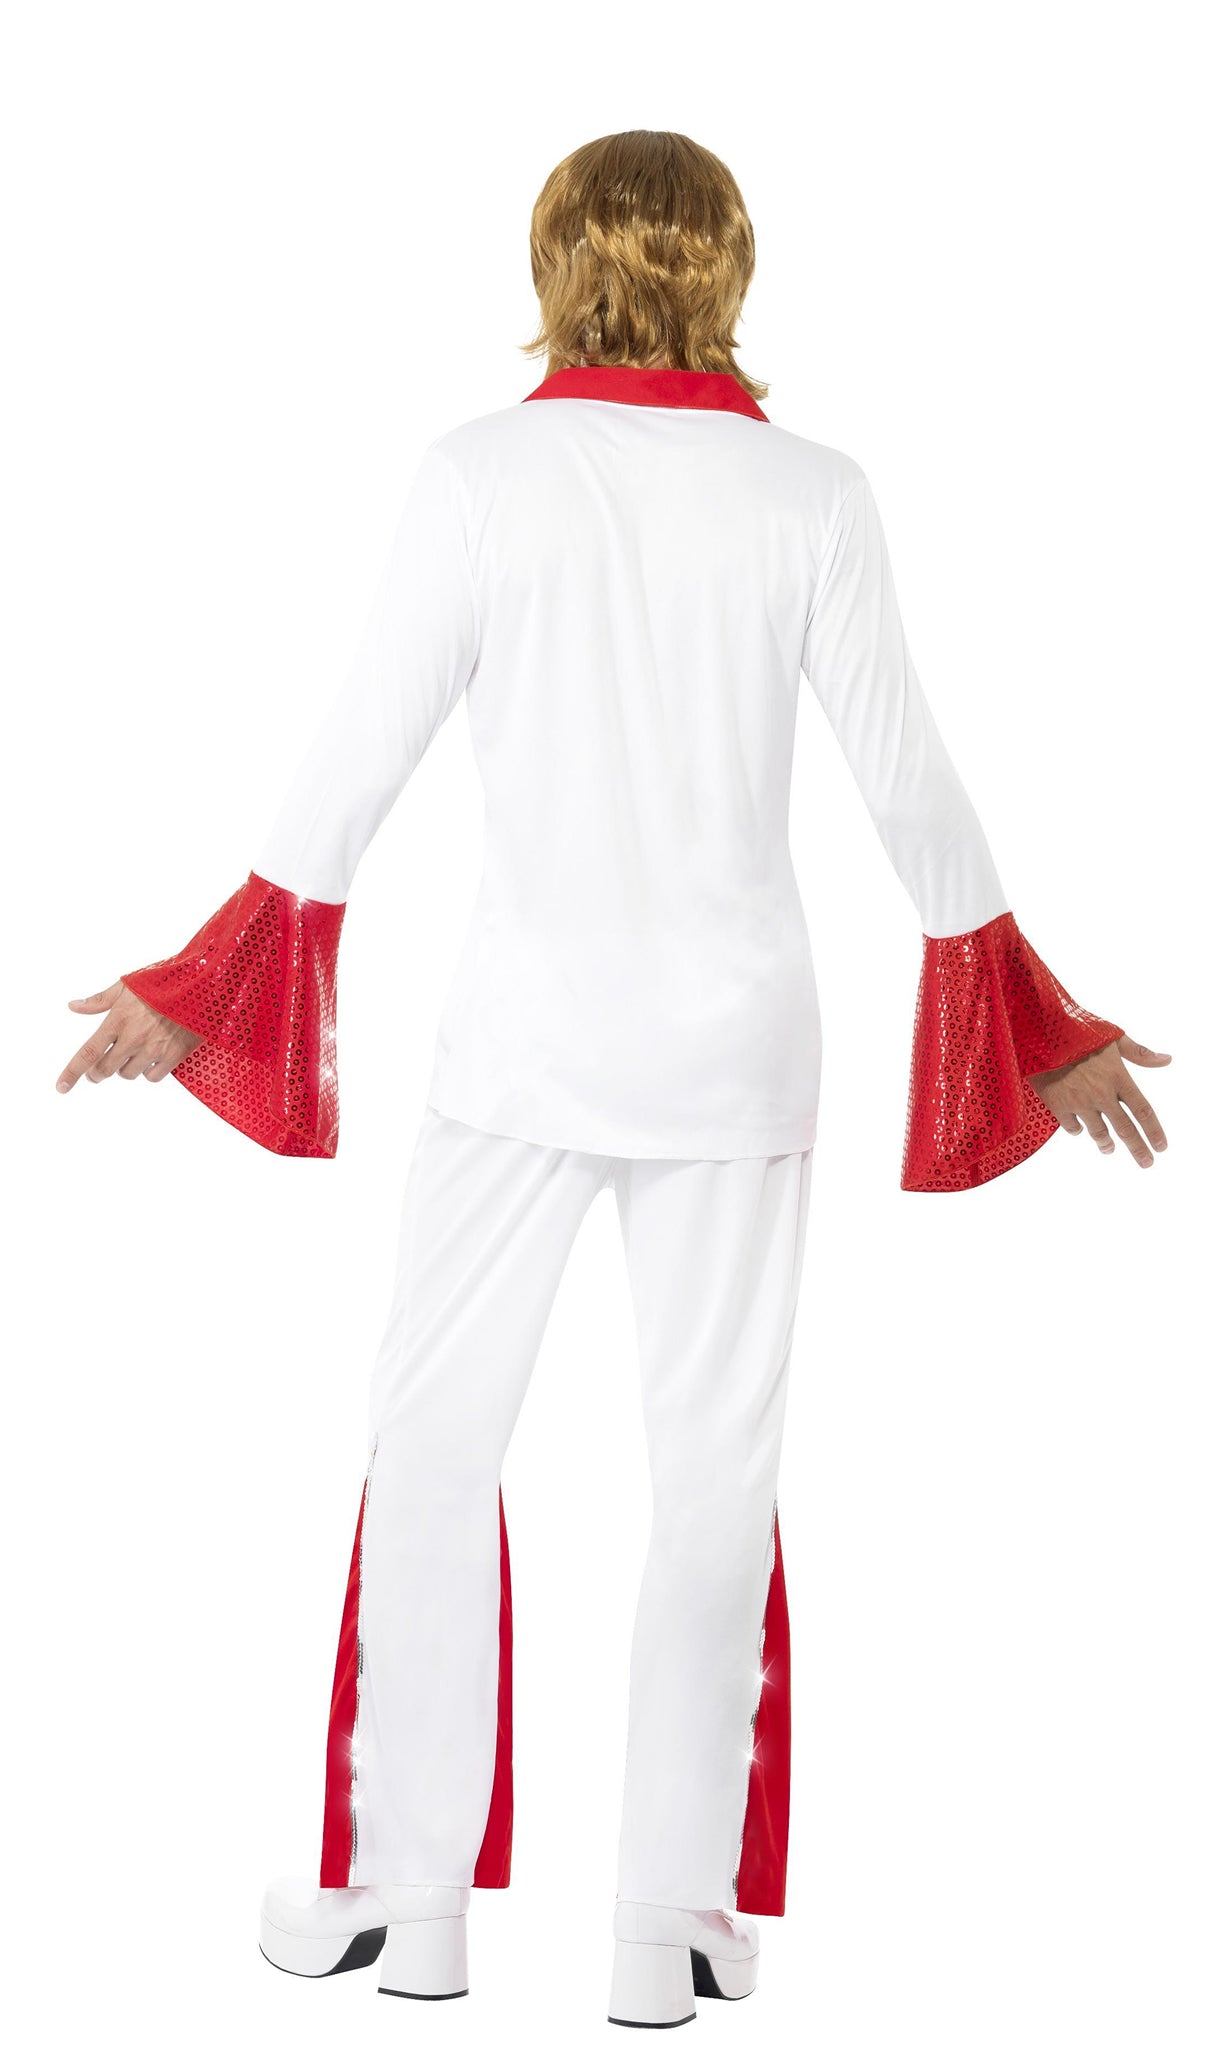 Back of white and red men's flared Abba top and pants